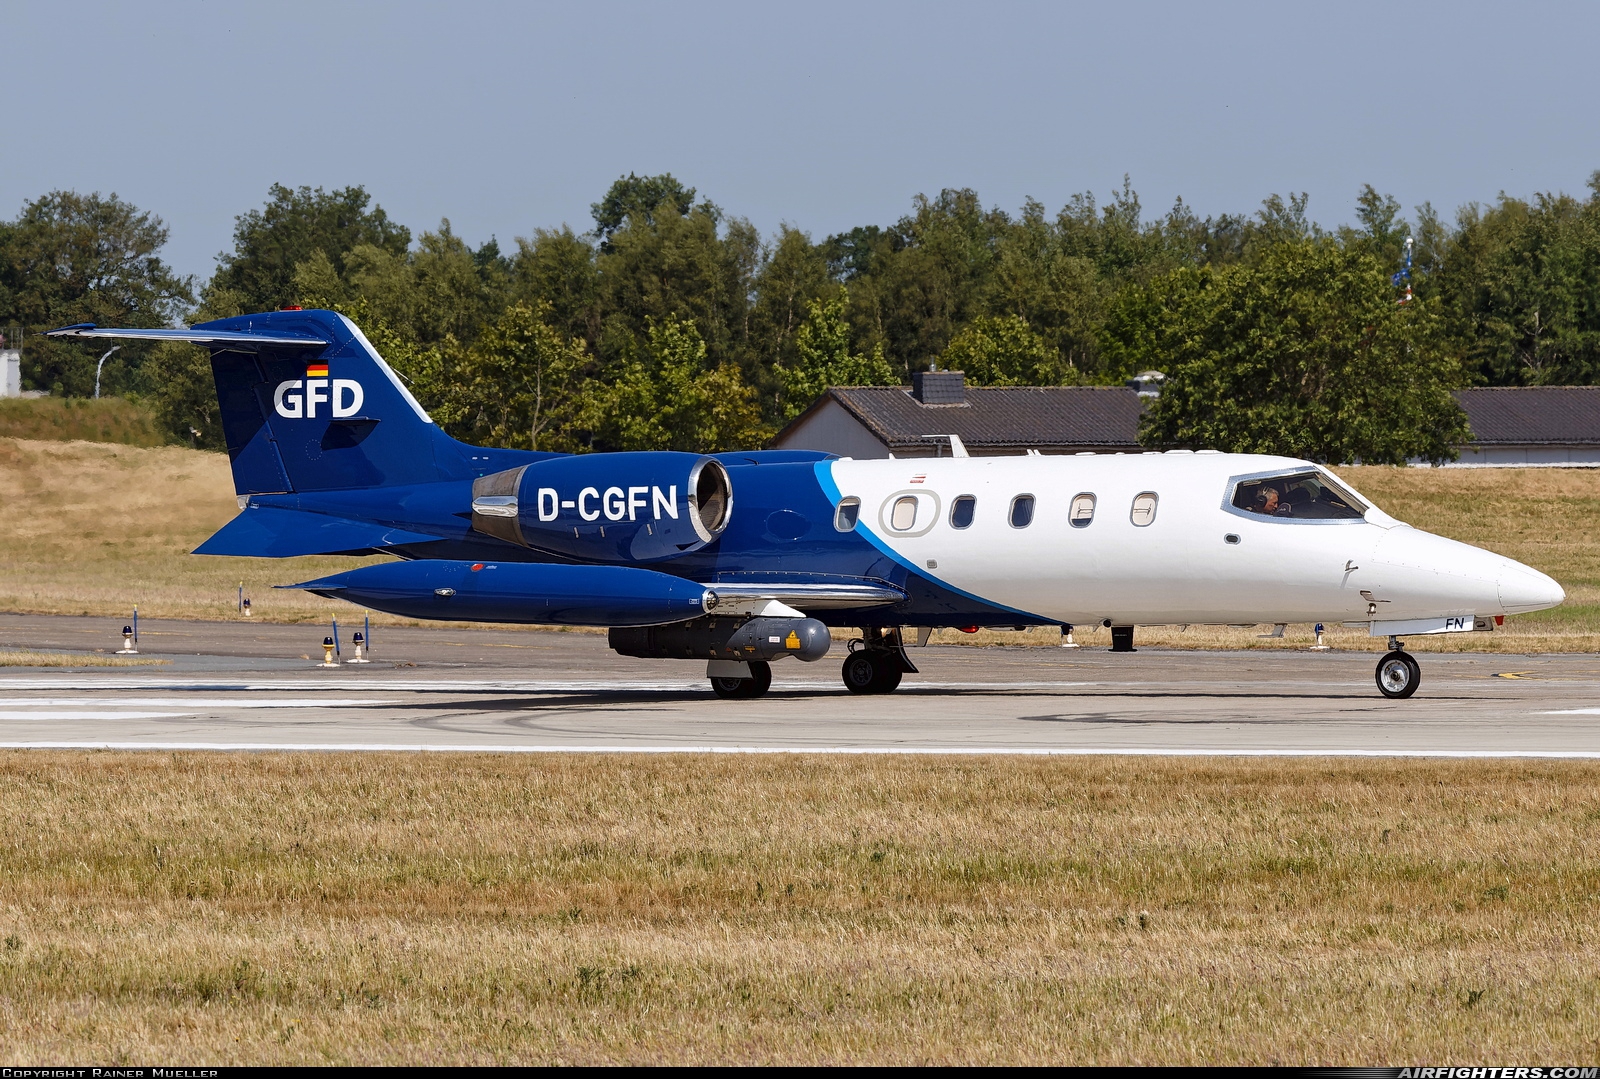 Company Owned - GFD Learjet 35A D-CGFN at Hohn (ETNH), Germany